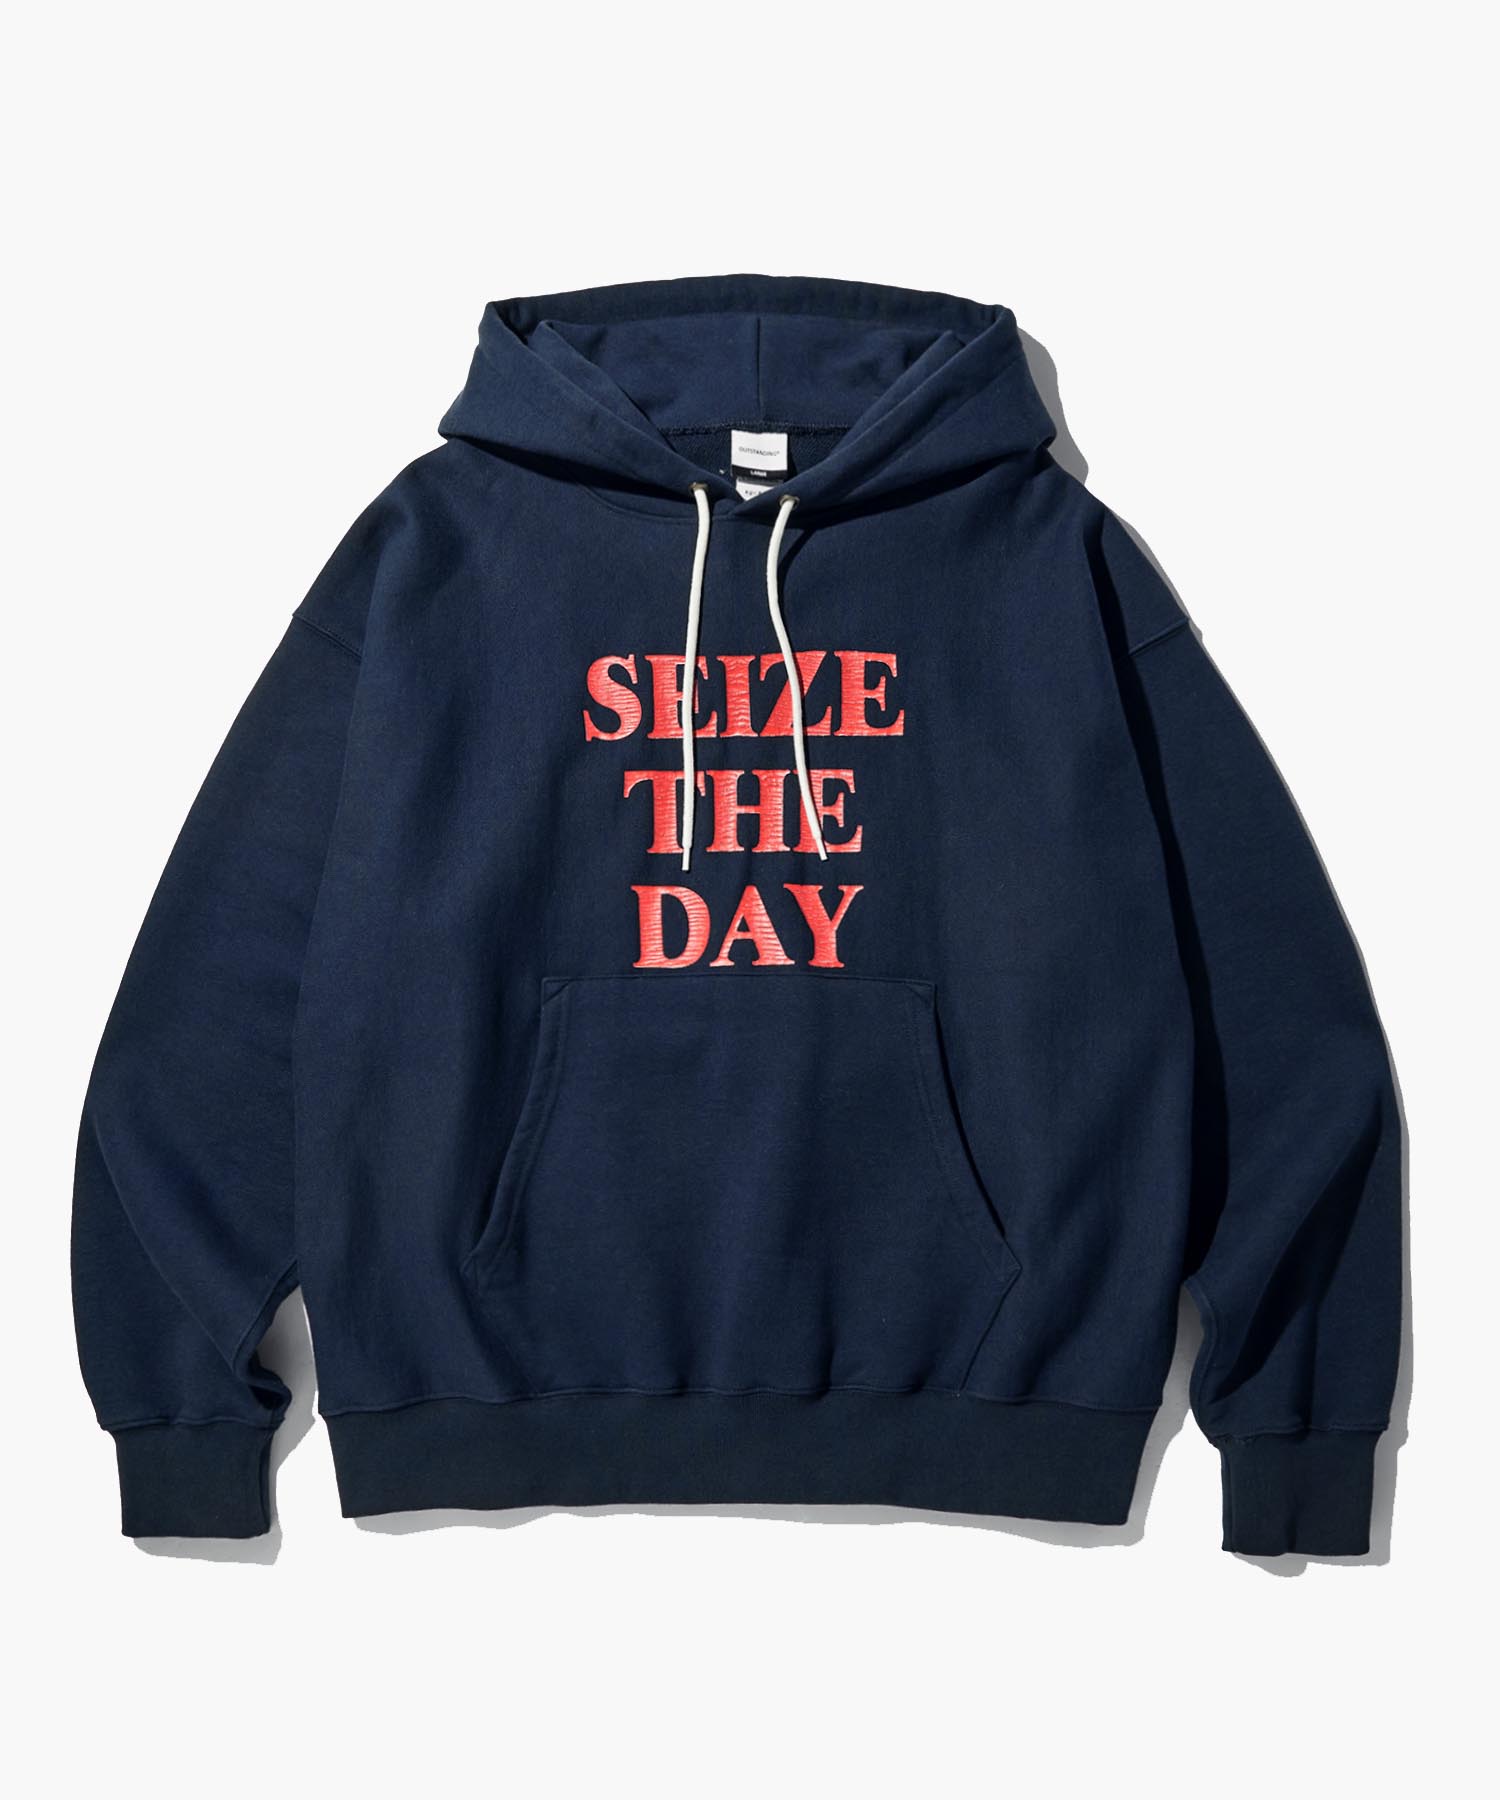 V.S.C HOOD SWEAT(SEIZE THE DAY)_NAVY